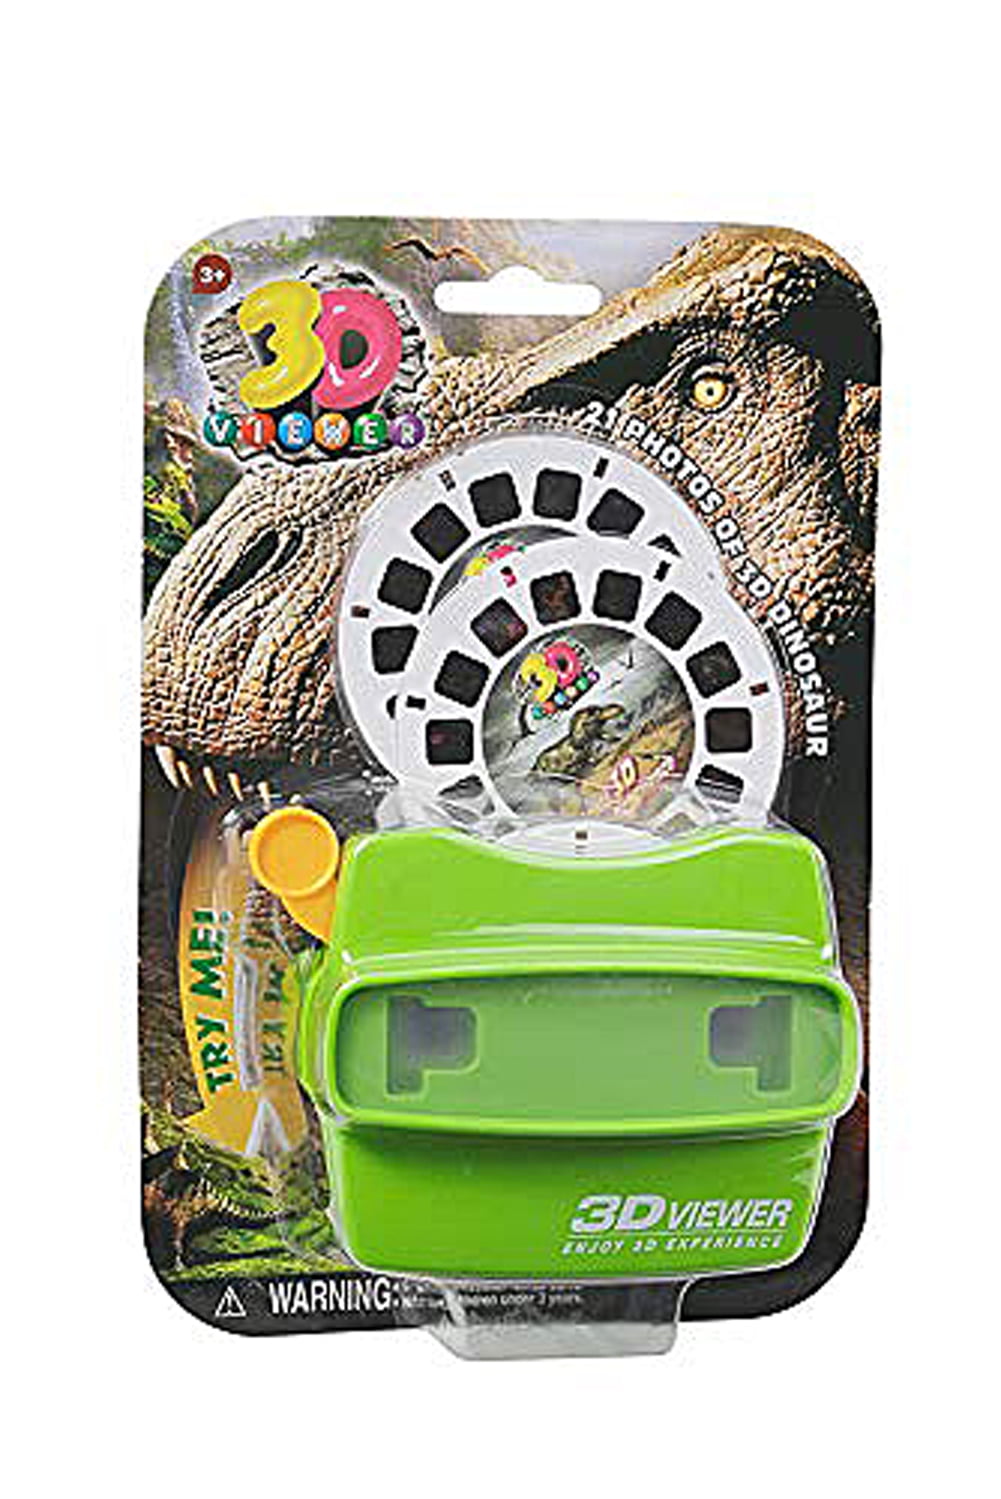 Warm Fuzzy Toys - Dinosaurs 3D Viewer 